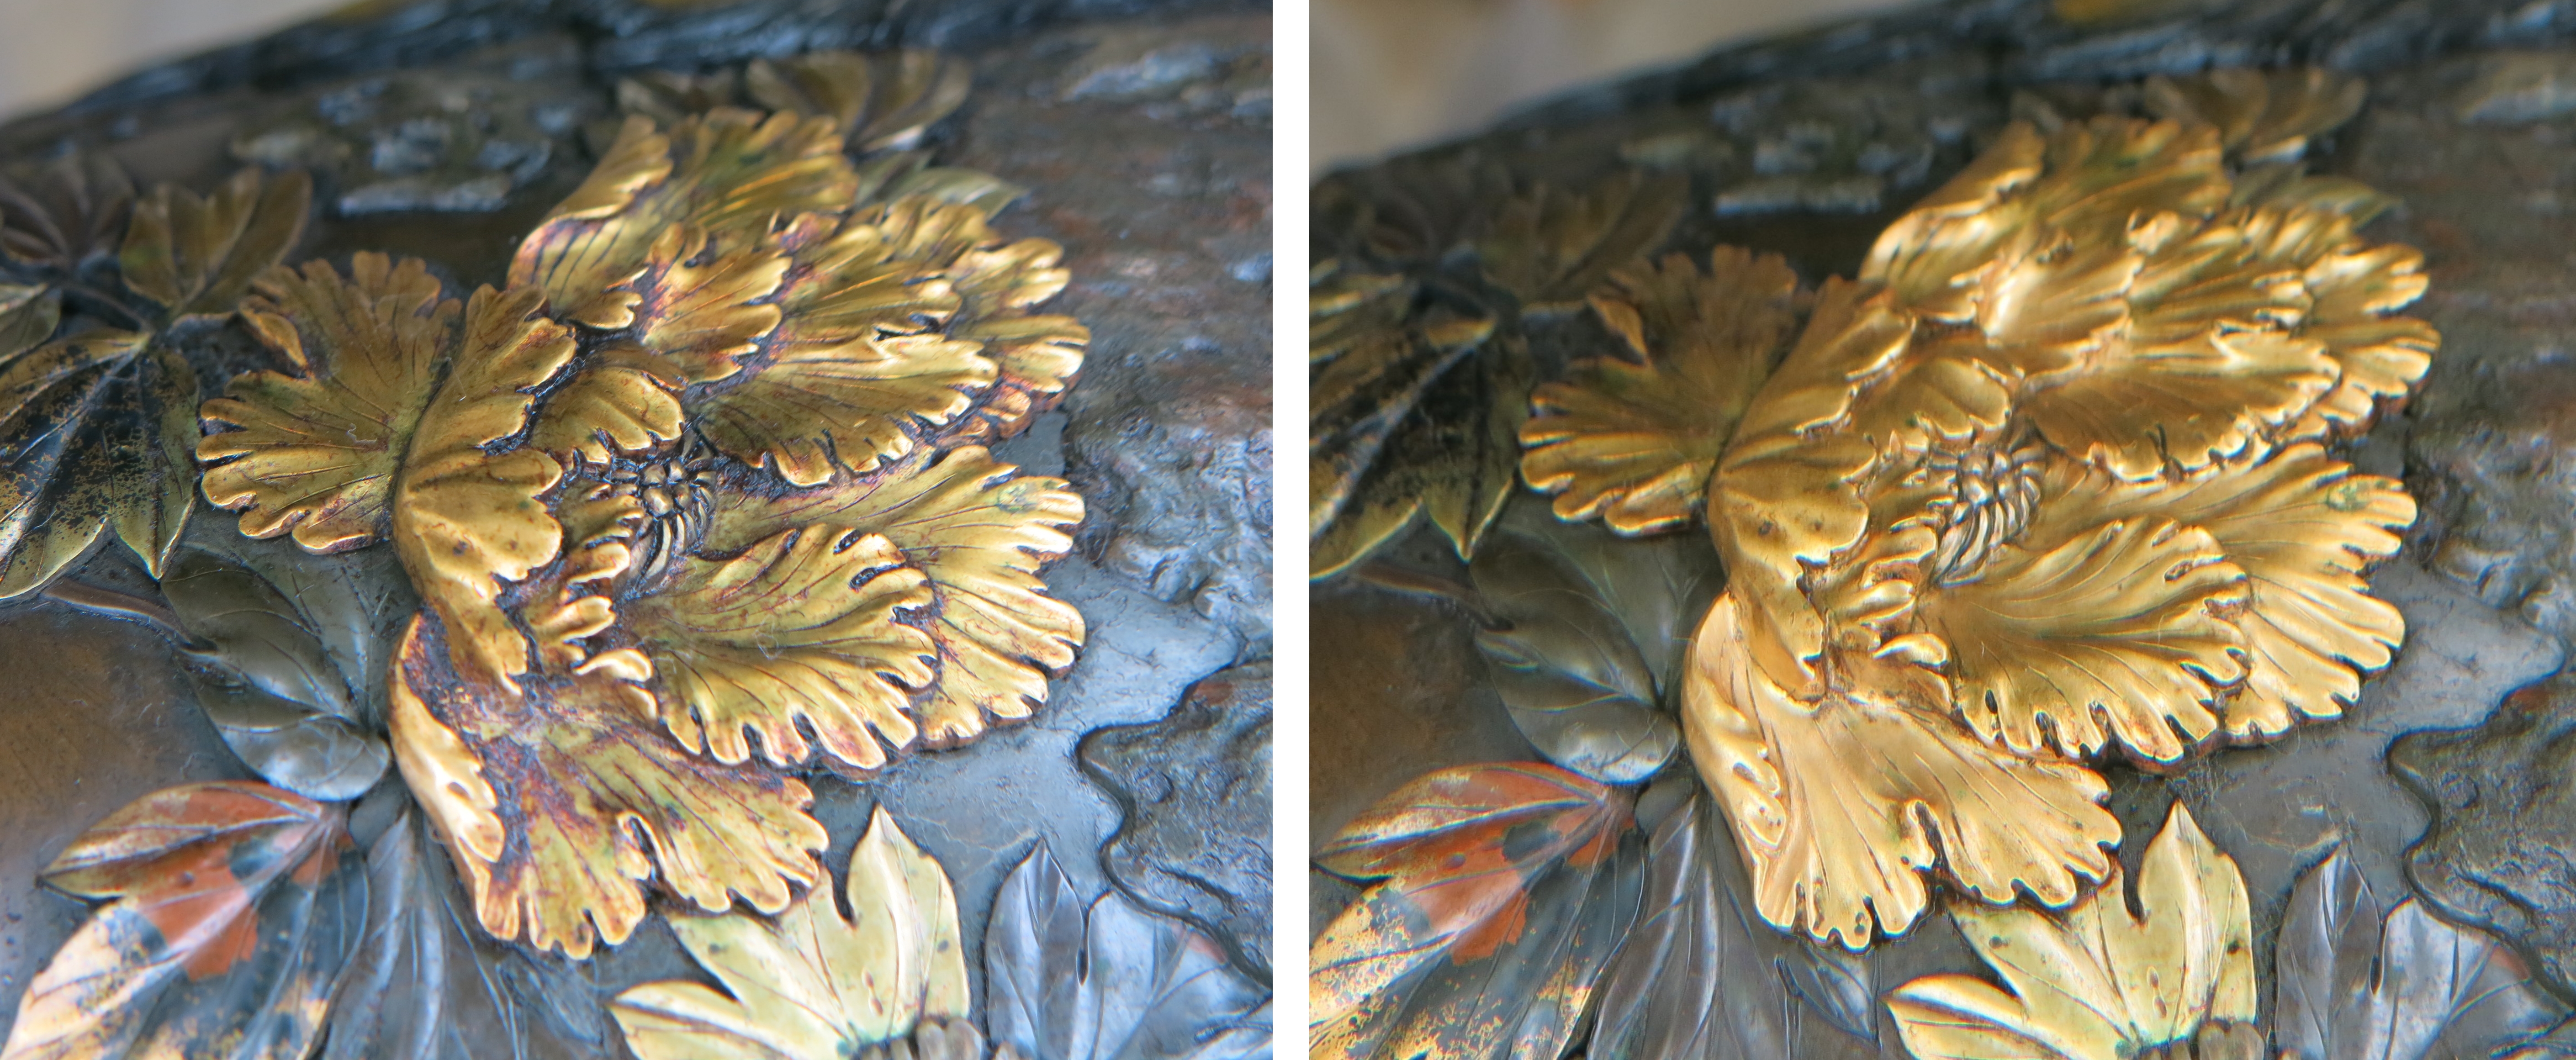 Left: Close up of a golden peony flower with a thick reddish-brown coating covering the recesses and a film over the remaining raised areas resulting in the dull appearance Right: Close up of the shiny golden peony flower.